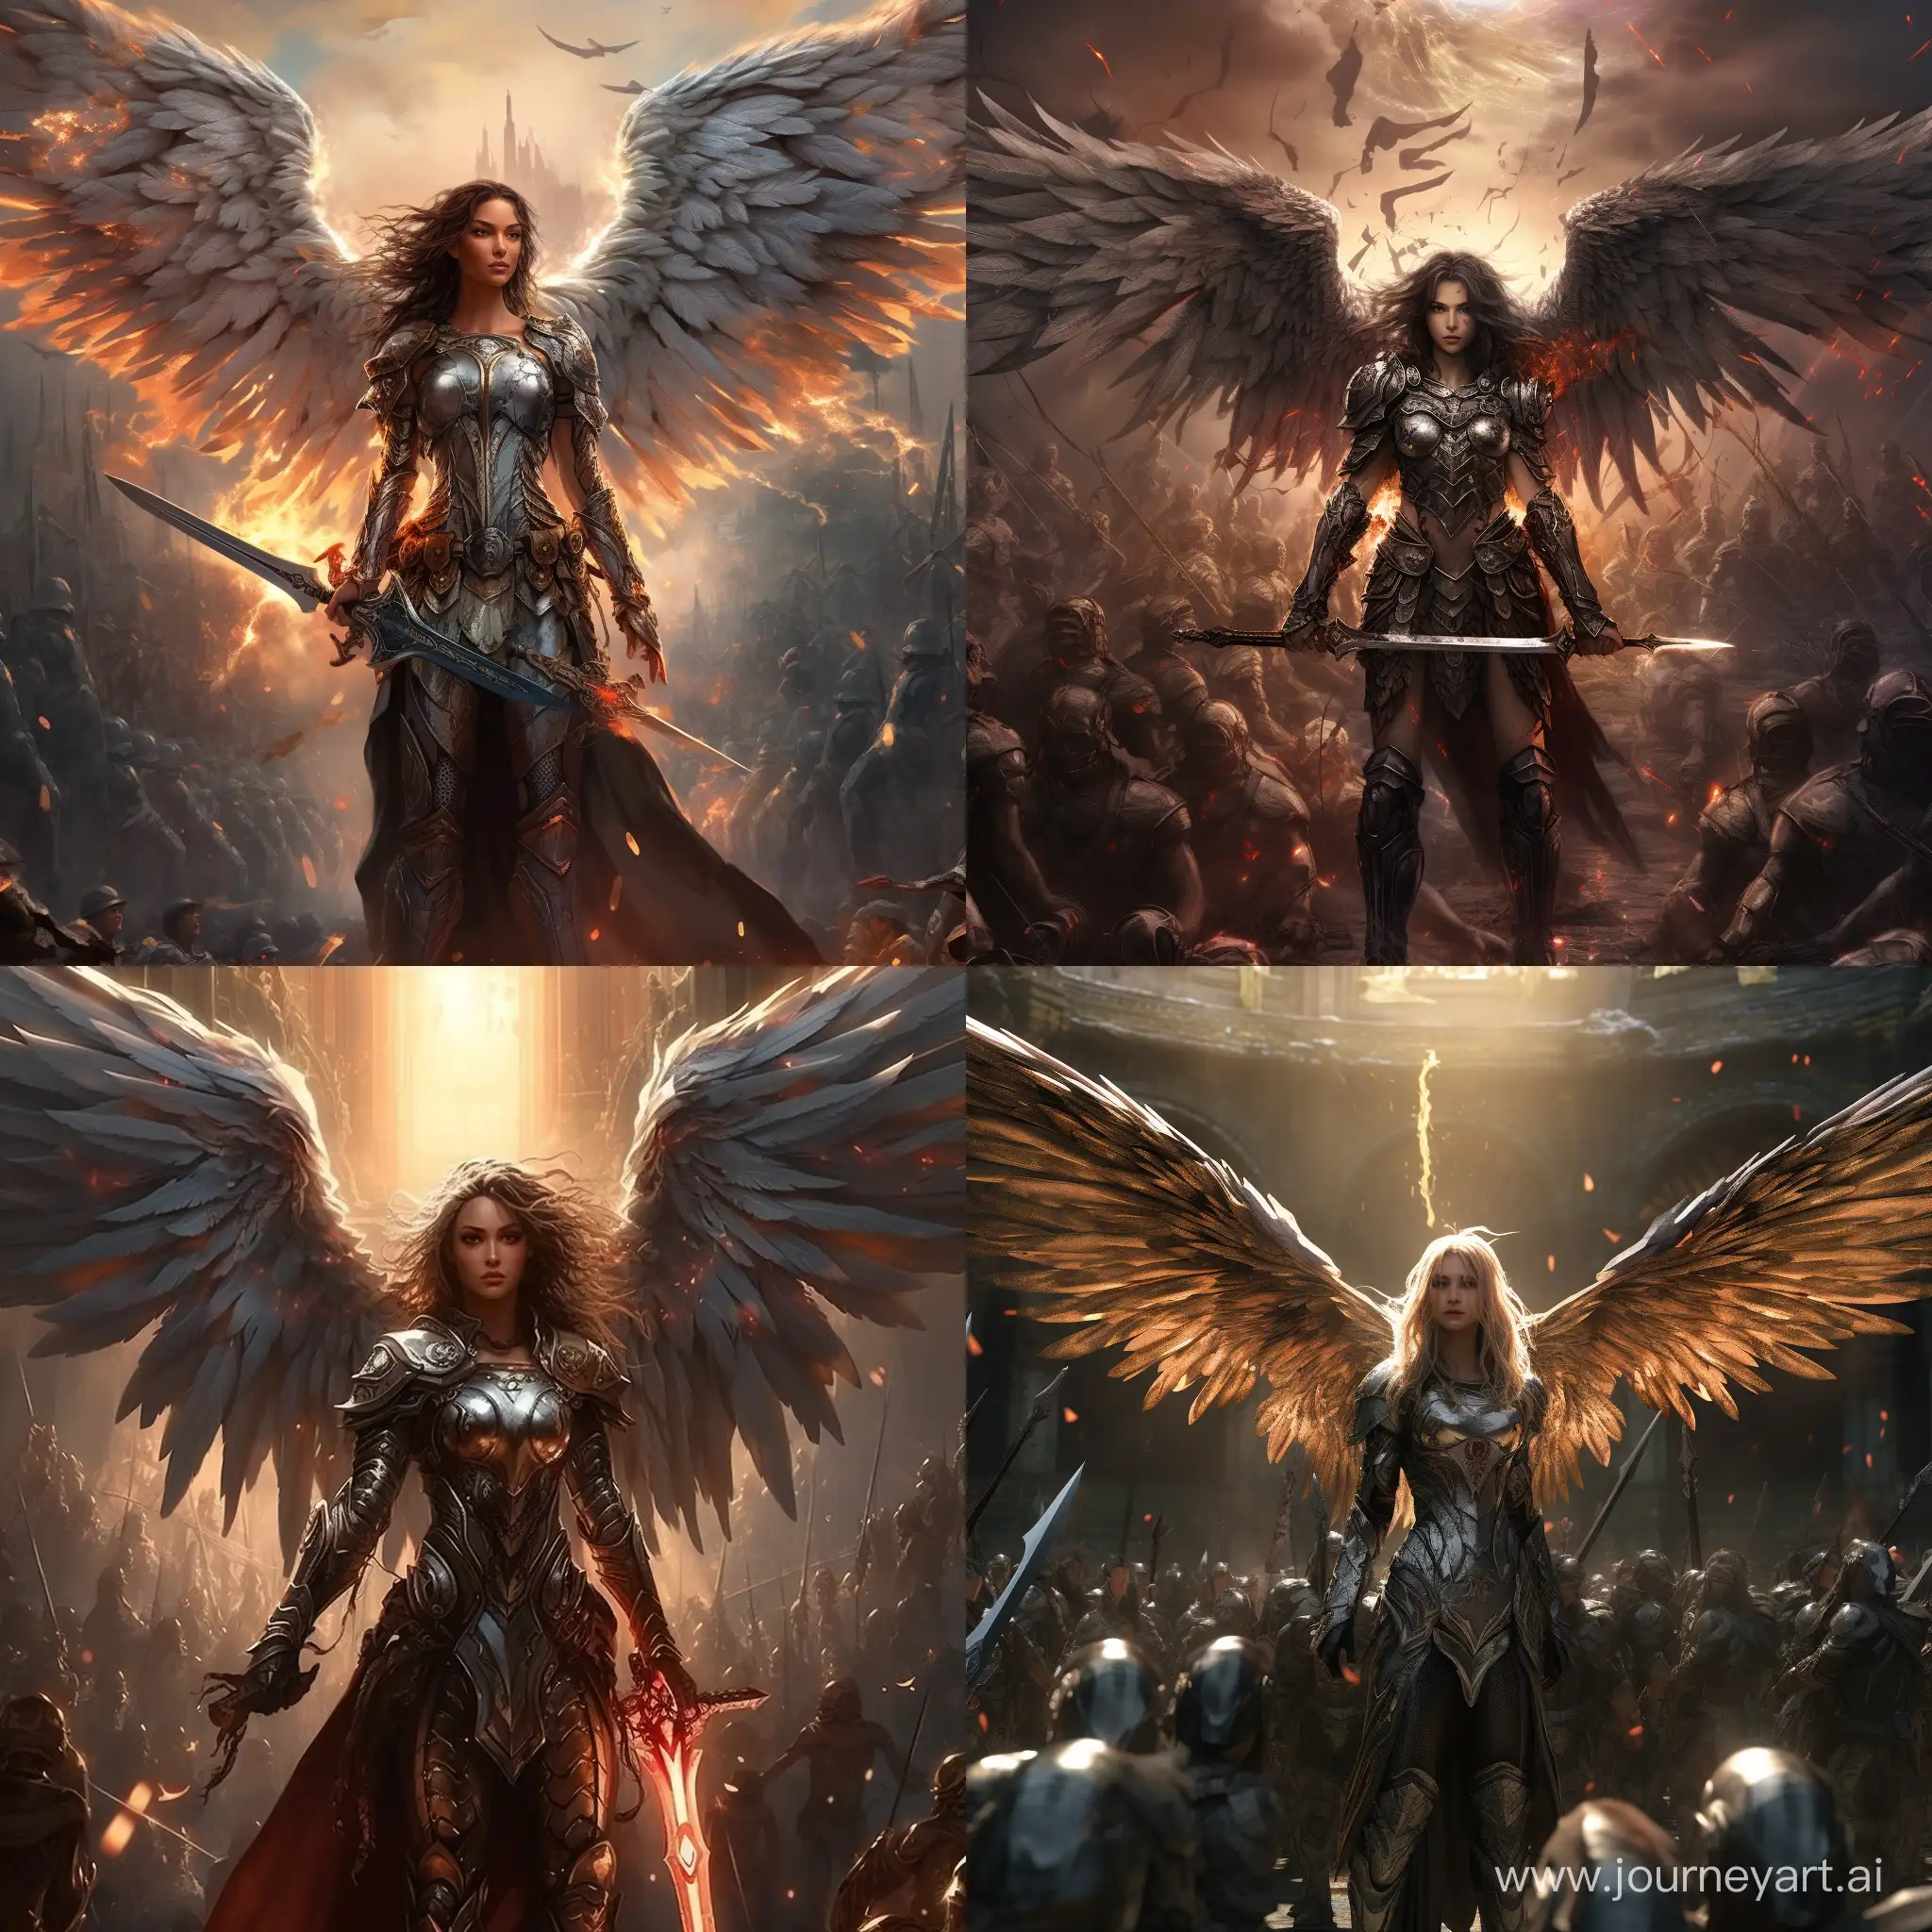 Holy-Female-Winged-Knight-Leading-Epic-Battle-in-High-Fantasy